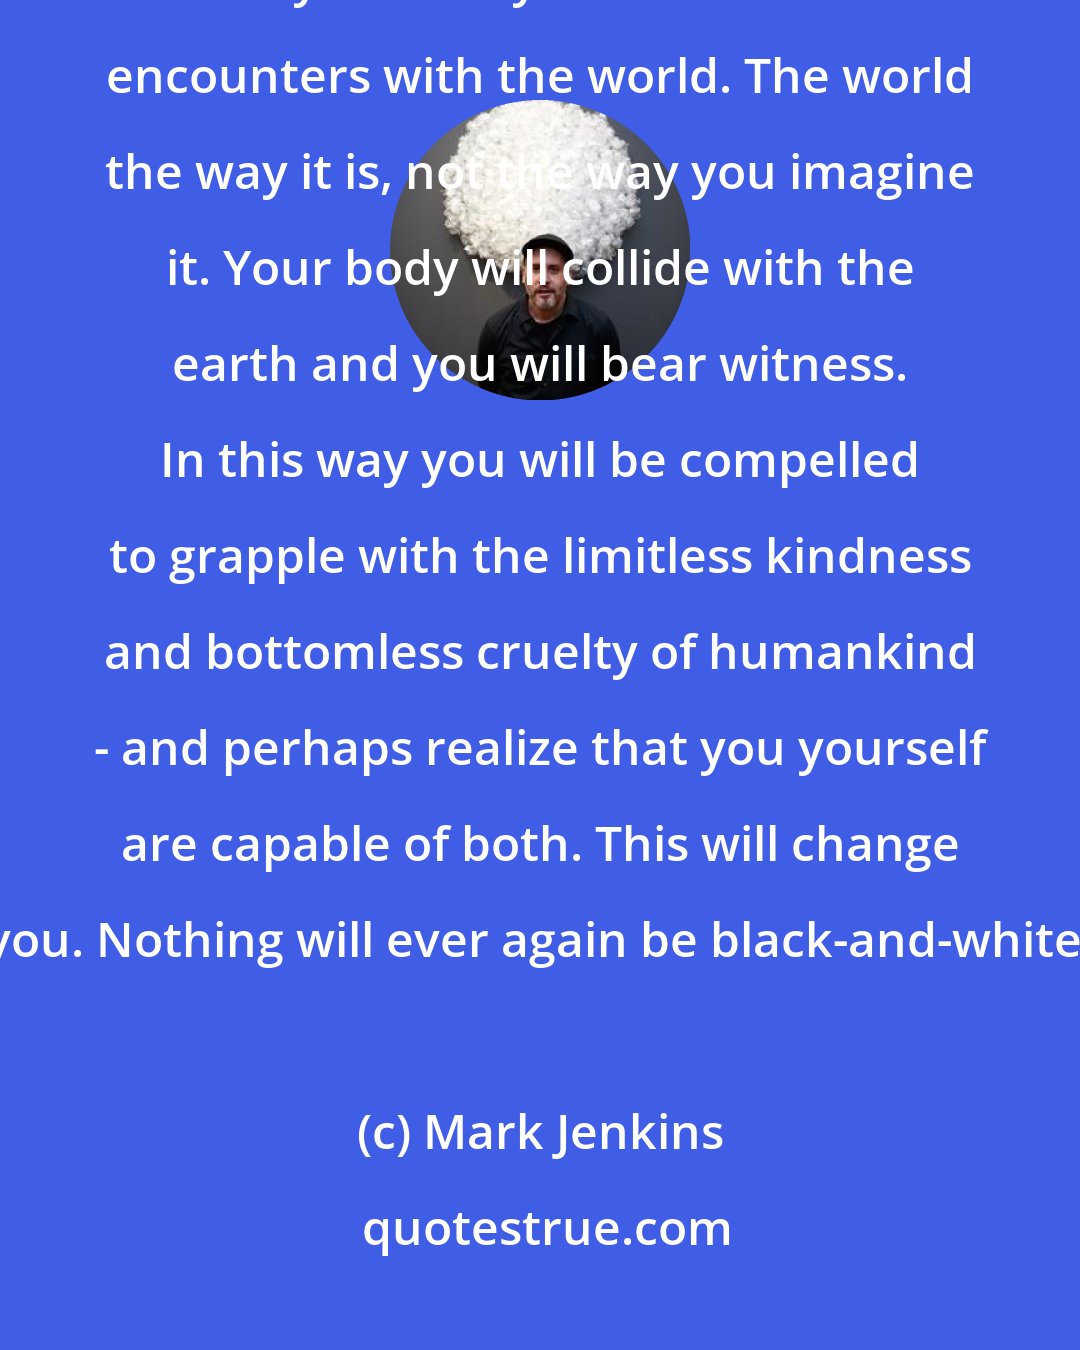 Mark Jenkins: Adventure is a path. Real adventure - self-determined, self-motivated, often risky - forces you to have firsthand encounters with the world. The world the way it is, not the way you imagine it. Your body will collide with the earth and you will bear witness. In this way you will be compelled to grapple with the limitless kindness and bottomless cruelty of humankind - and perhaps realize that you yourself are capable of both. This will change you. Nothing will ever again be black-and-white.